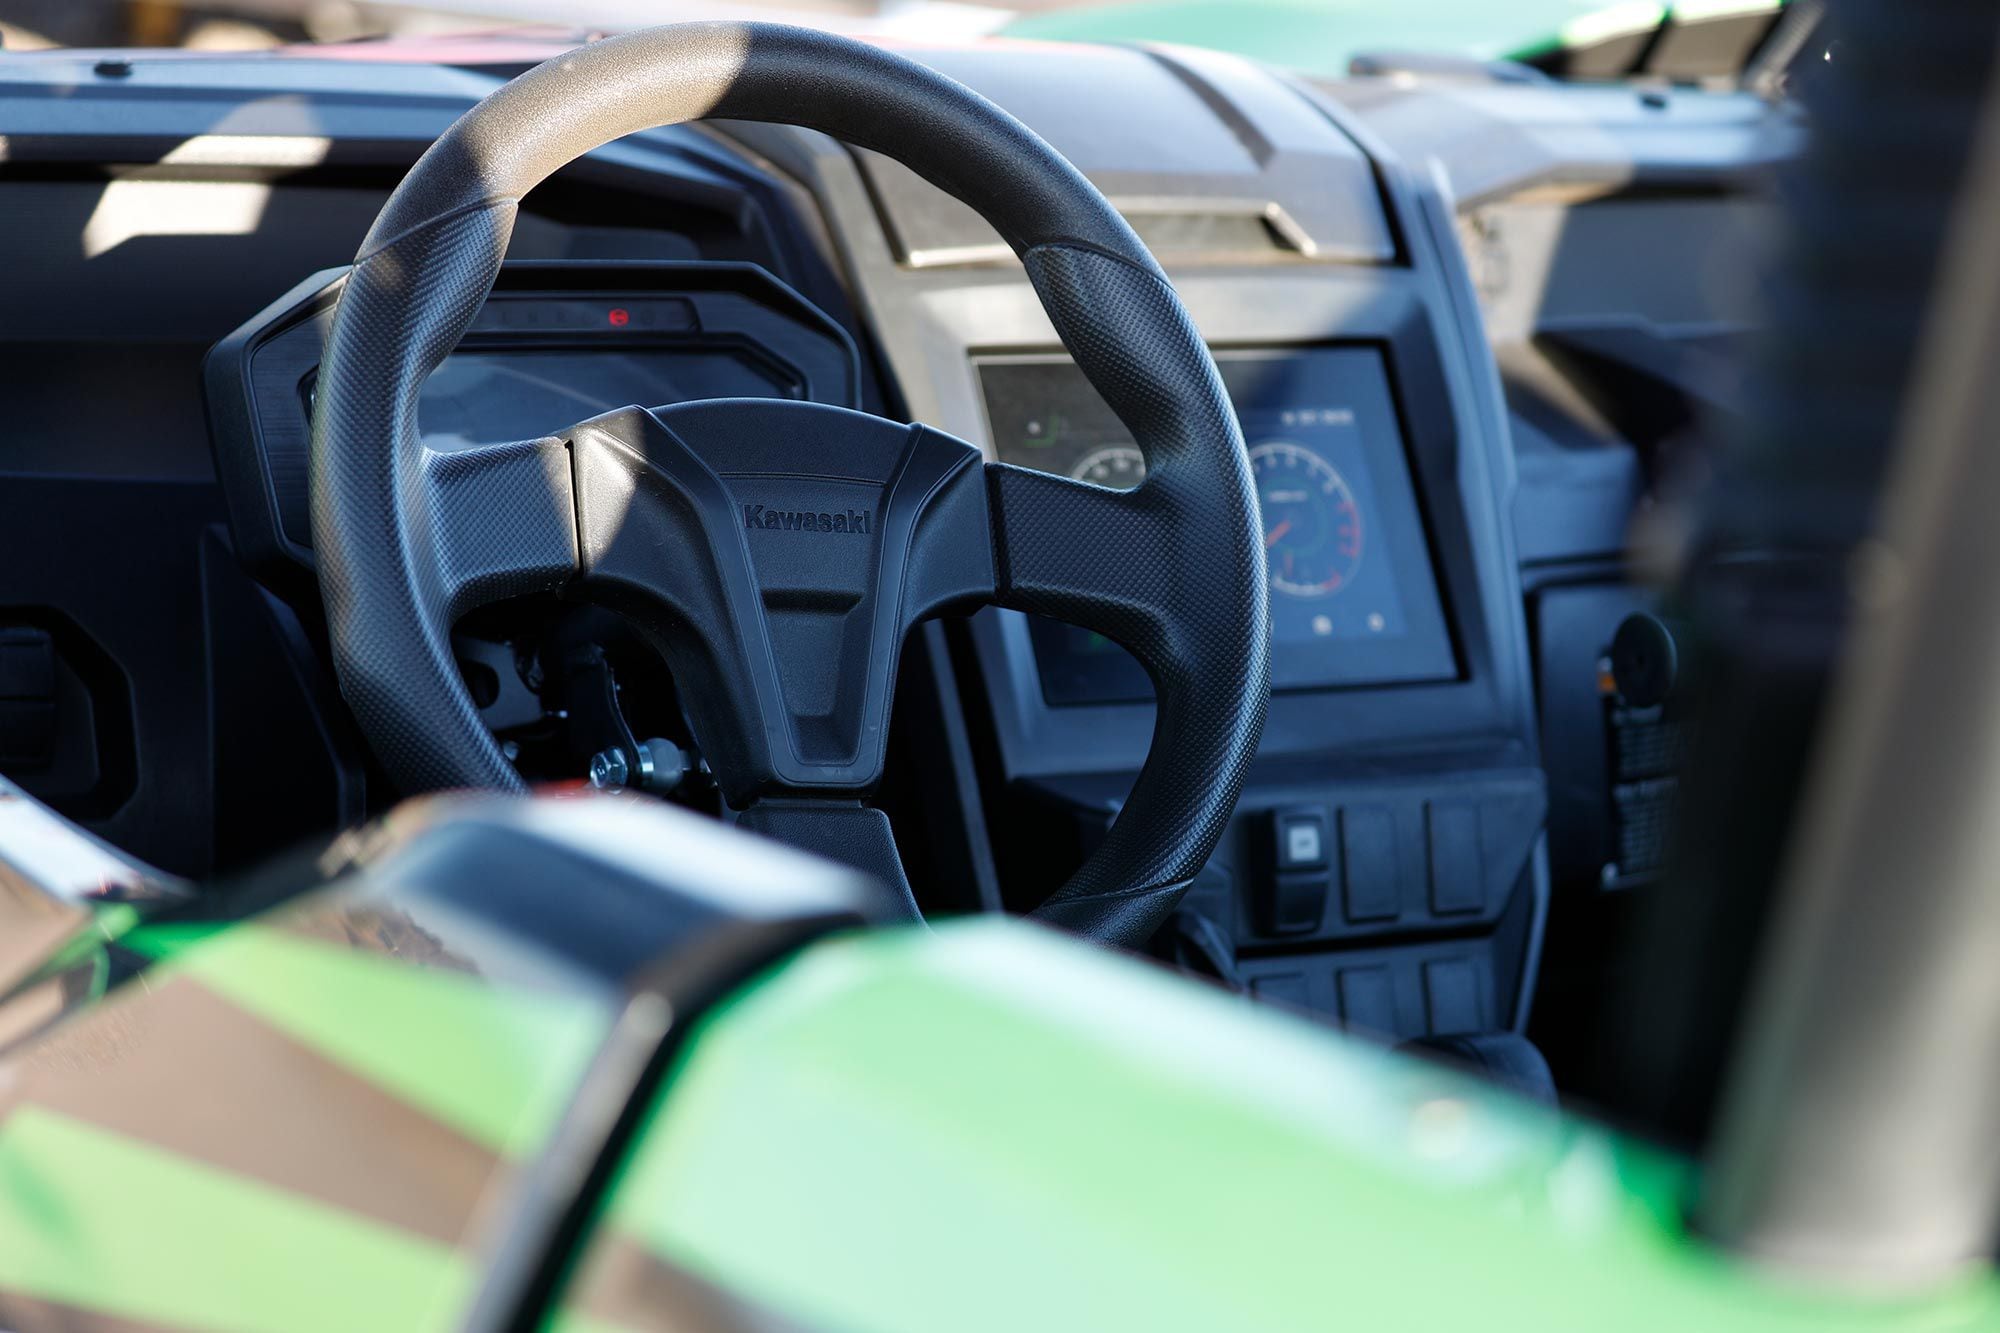 Automobile-style controls make it easy to understand how to operate the Teryx KRX 1000.